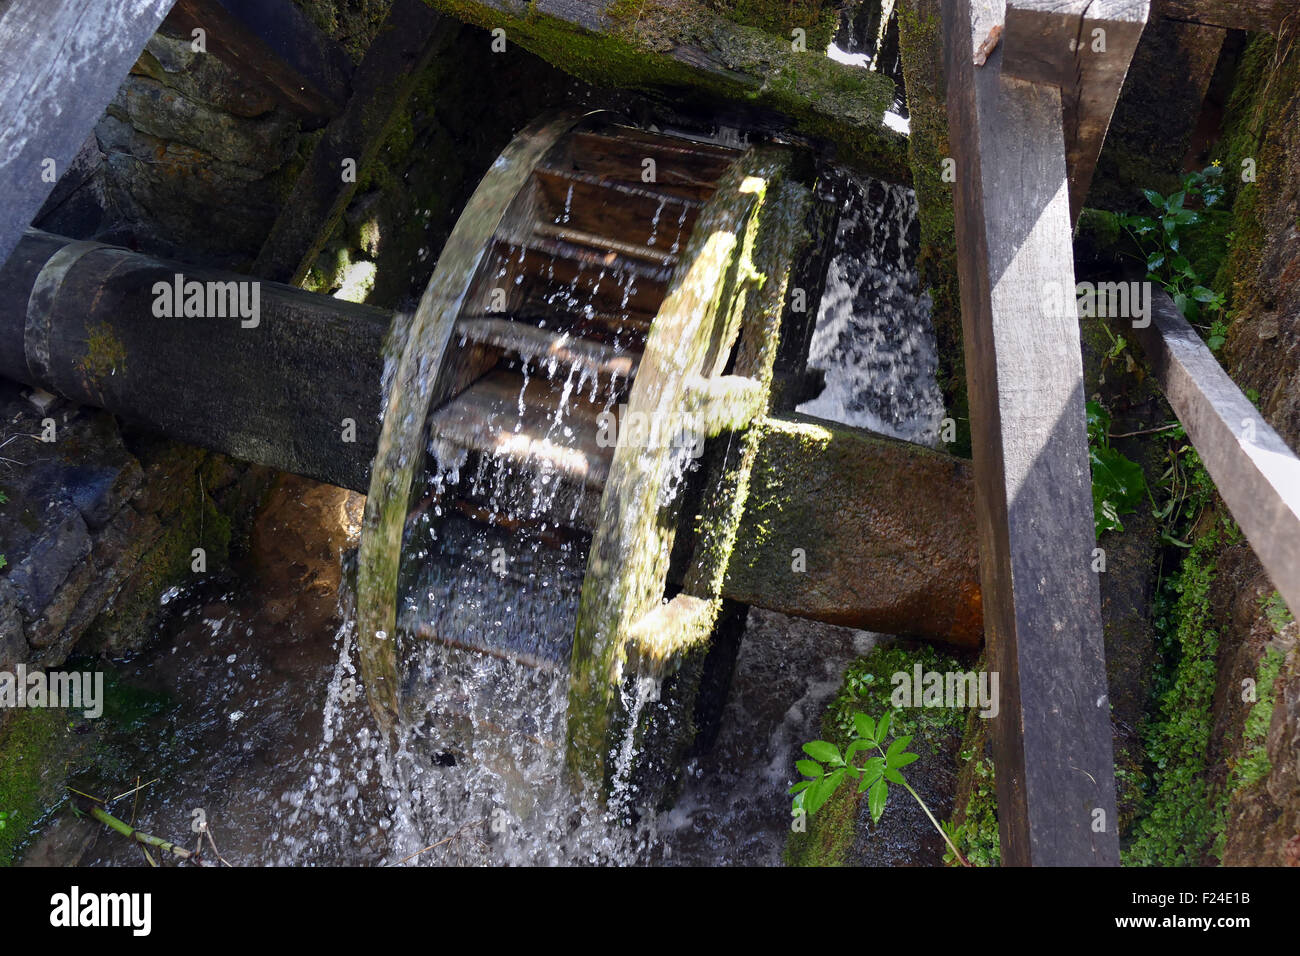 Use of water to drive the mill. Stock Photo